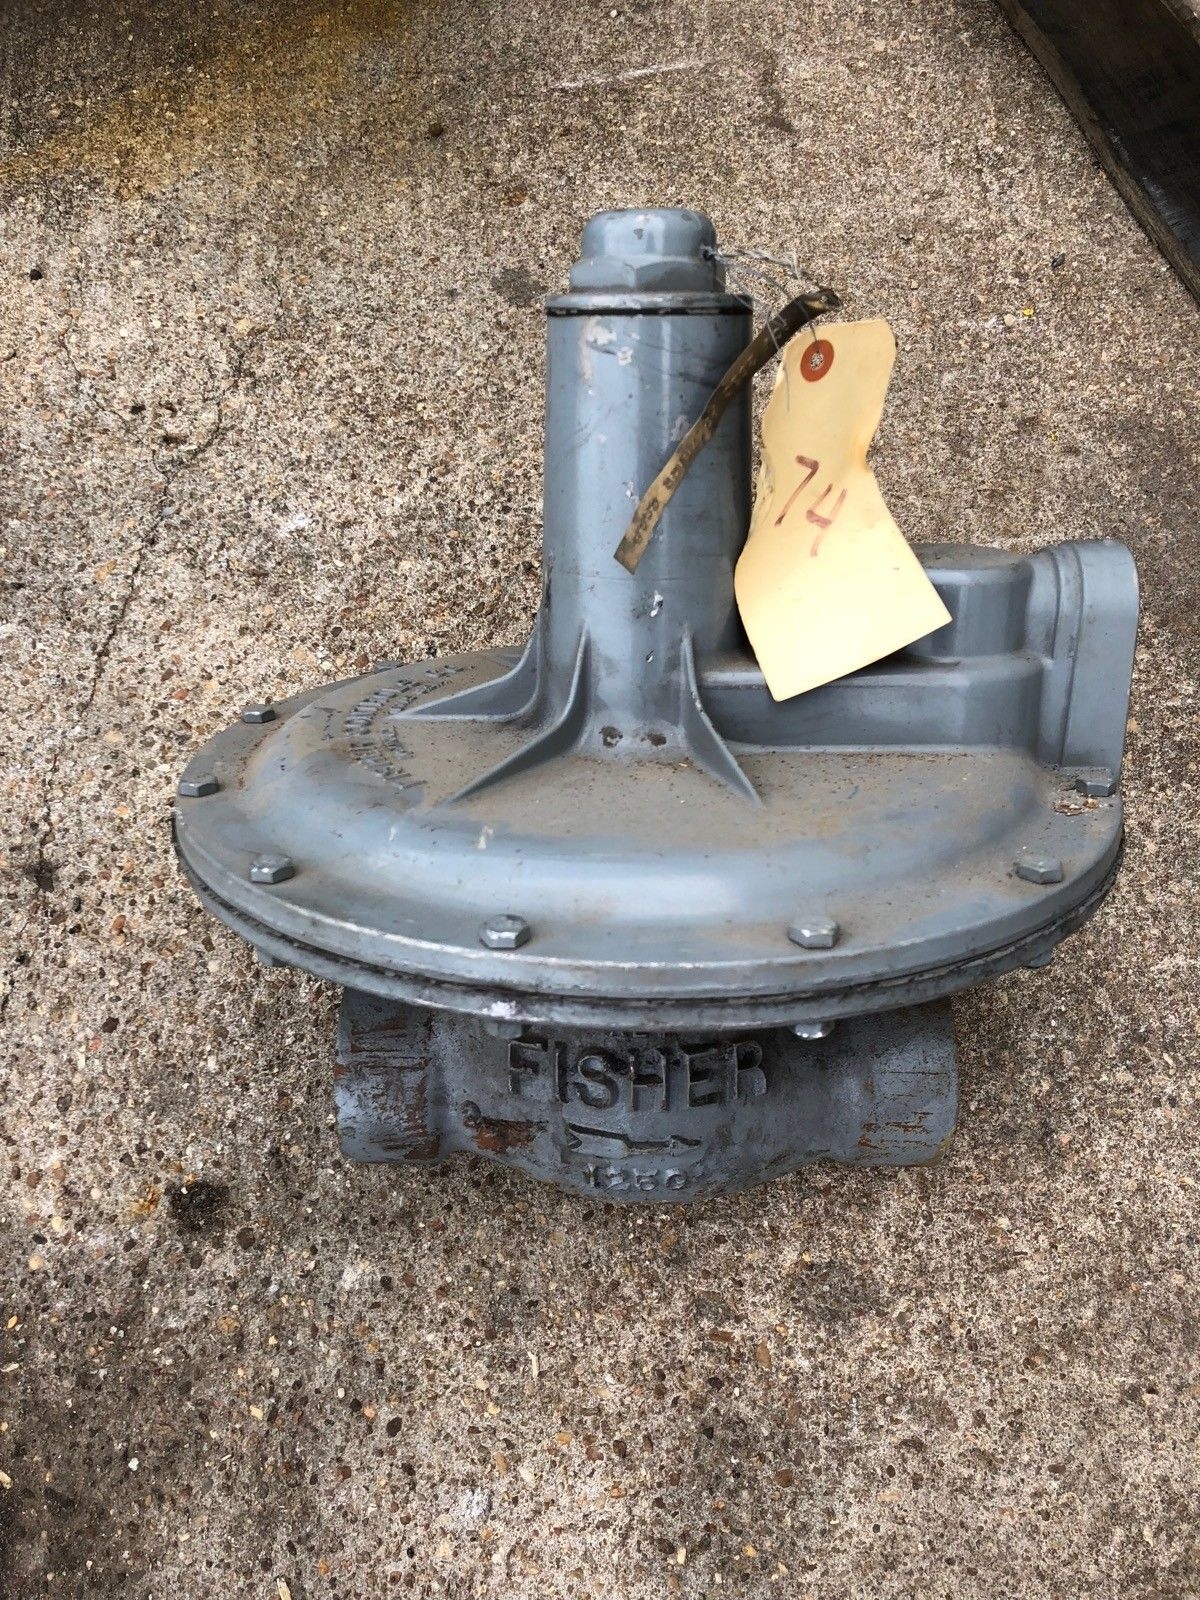 Details about  / USED Fisher Control Valve Type 133L Pressure Regulator 133-1065-10865 Size 2